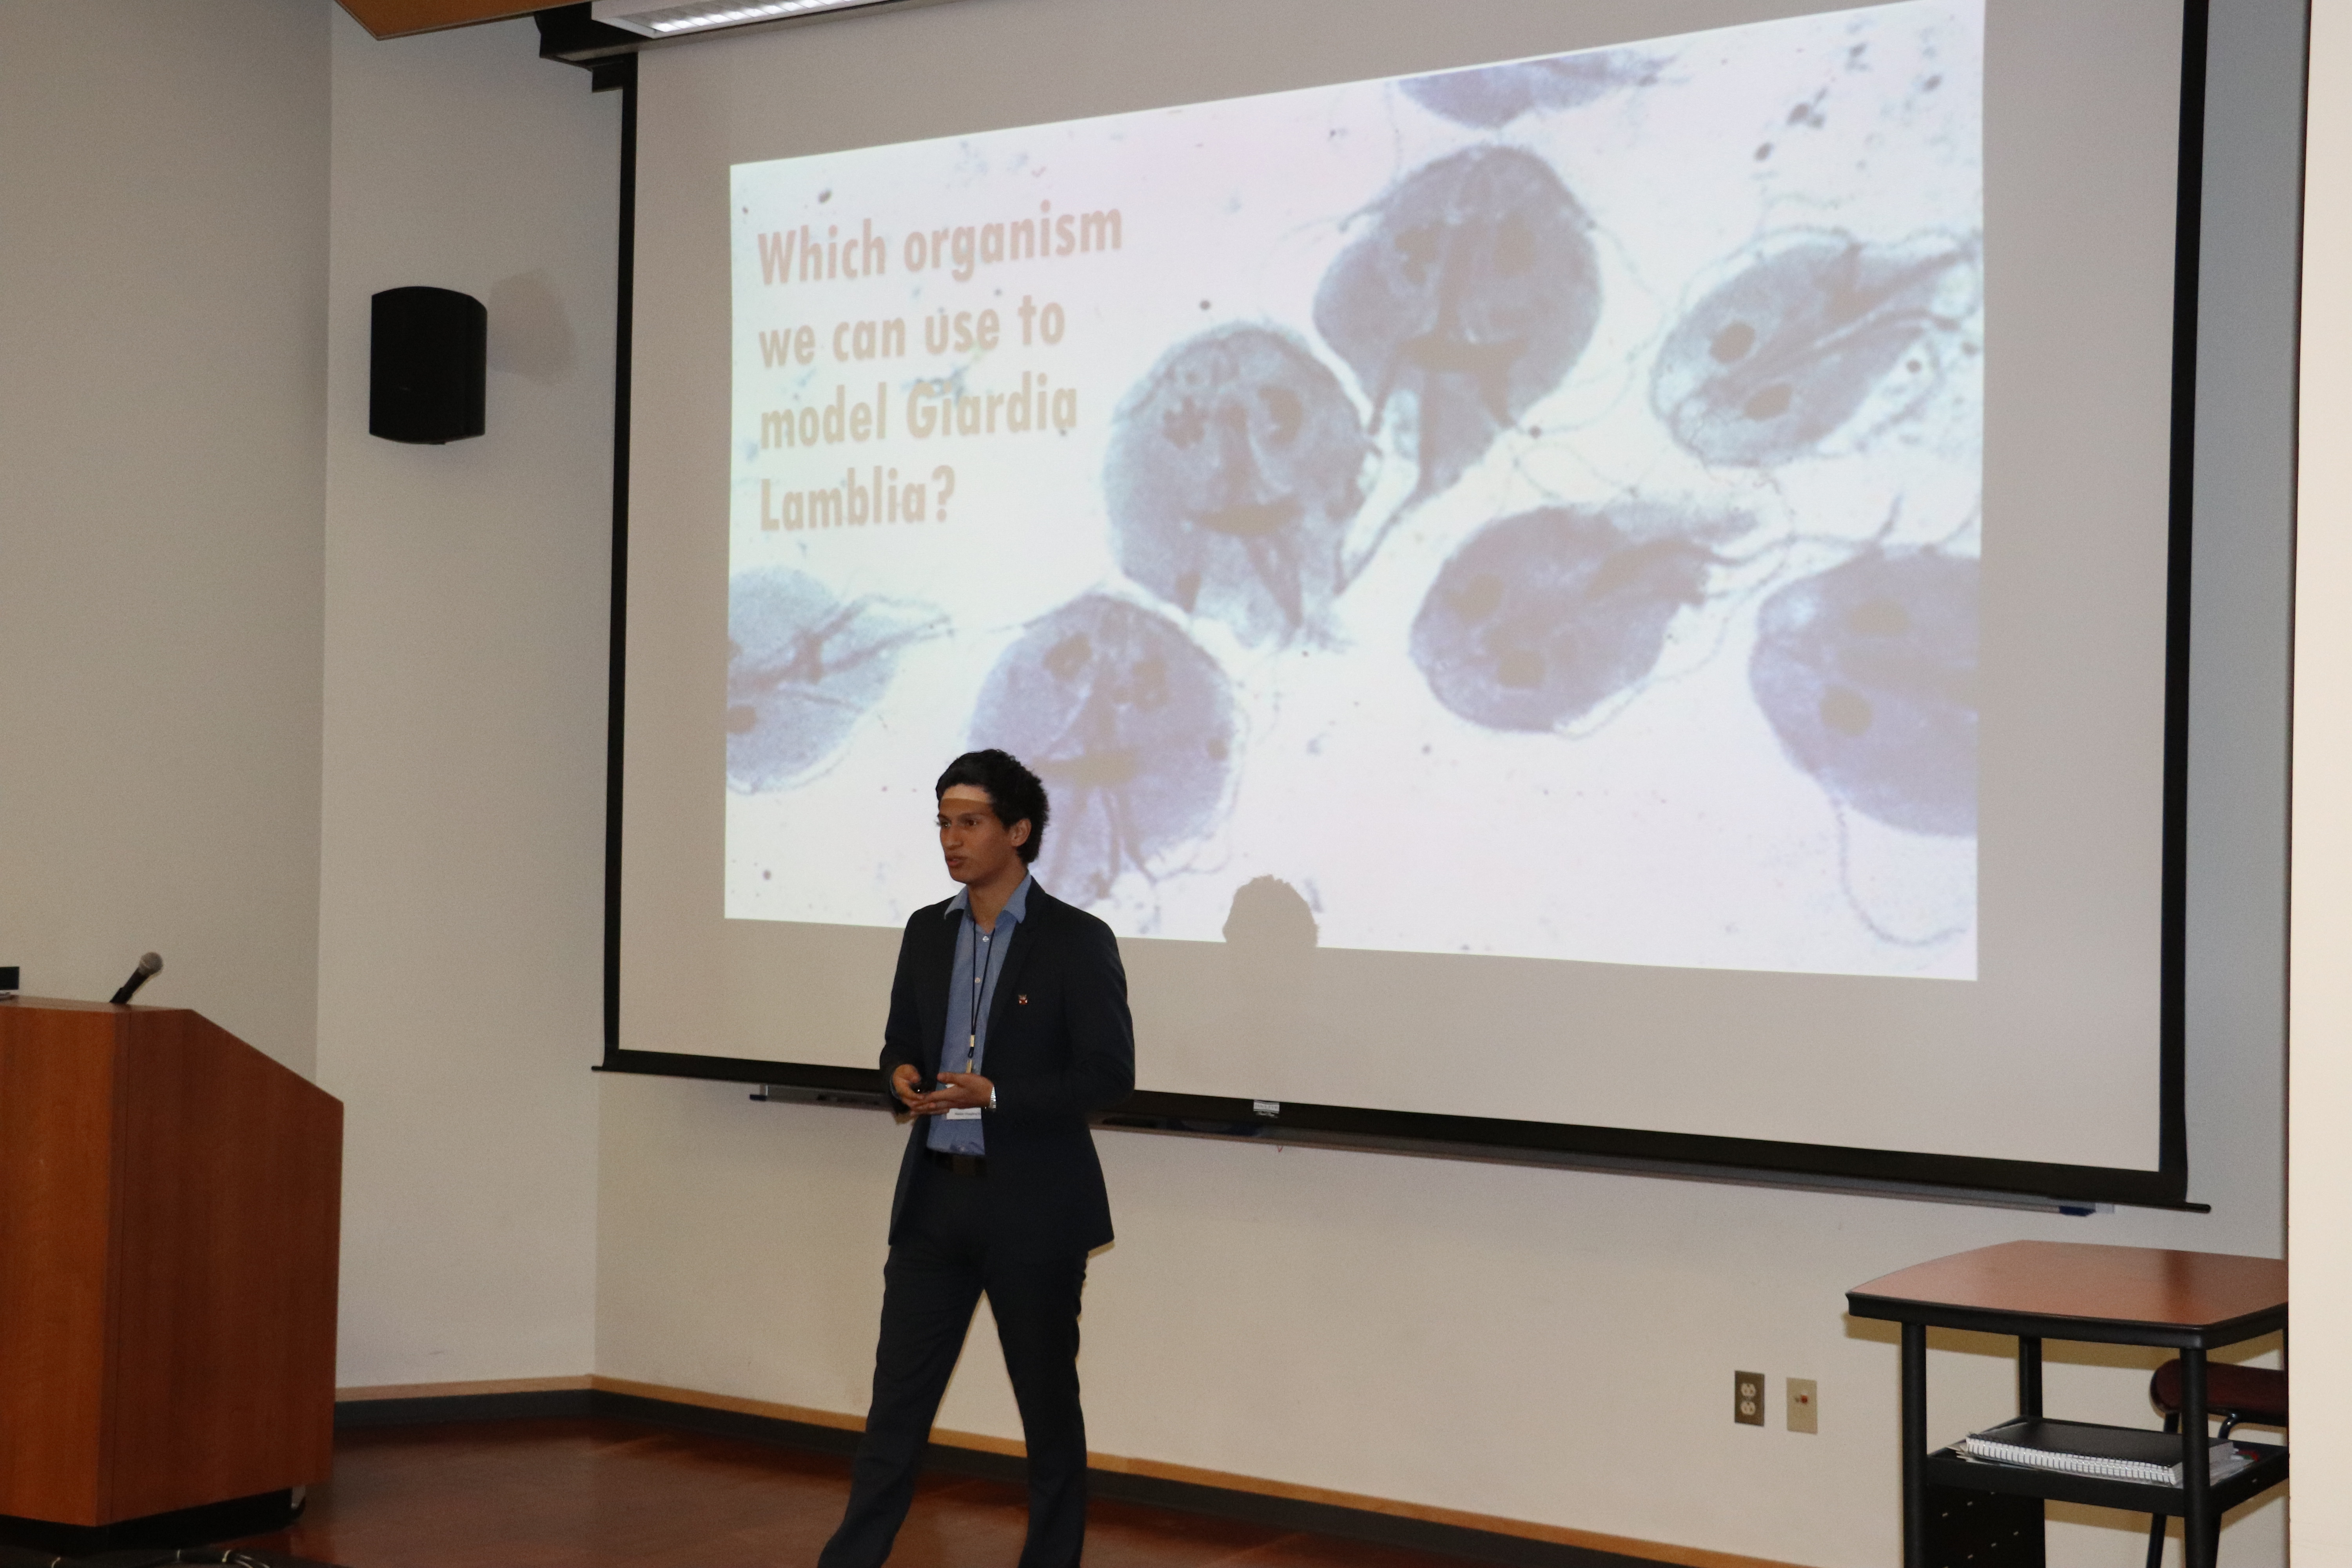 Josemaria Soriano presents his research. Soriano is a sophomore at St. Mary's University in San Antonio.